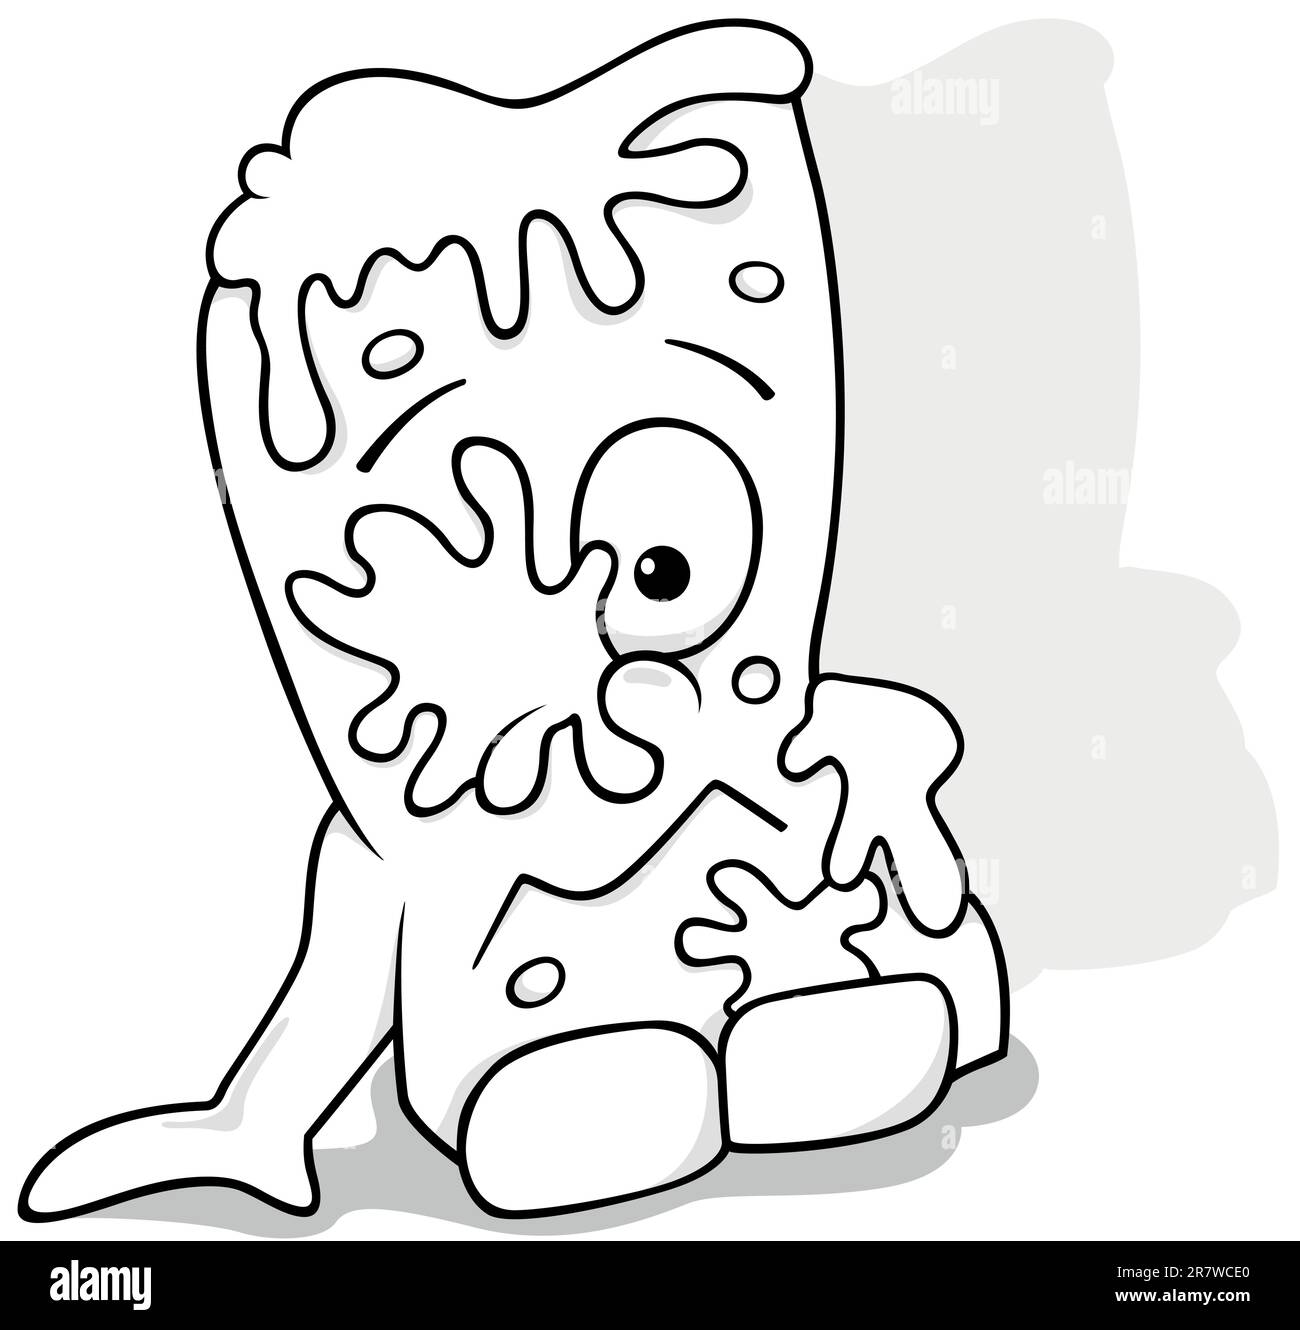 Drawing of a Garbage Sponge Monster Stock Vector